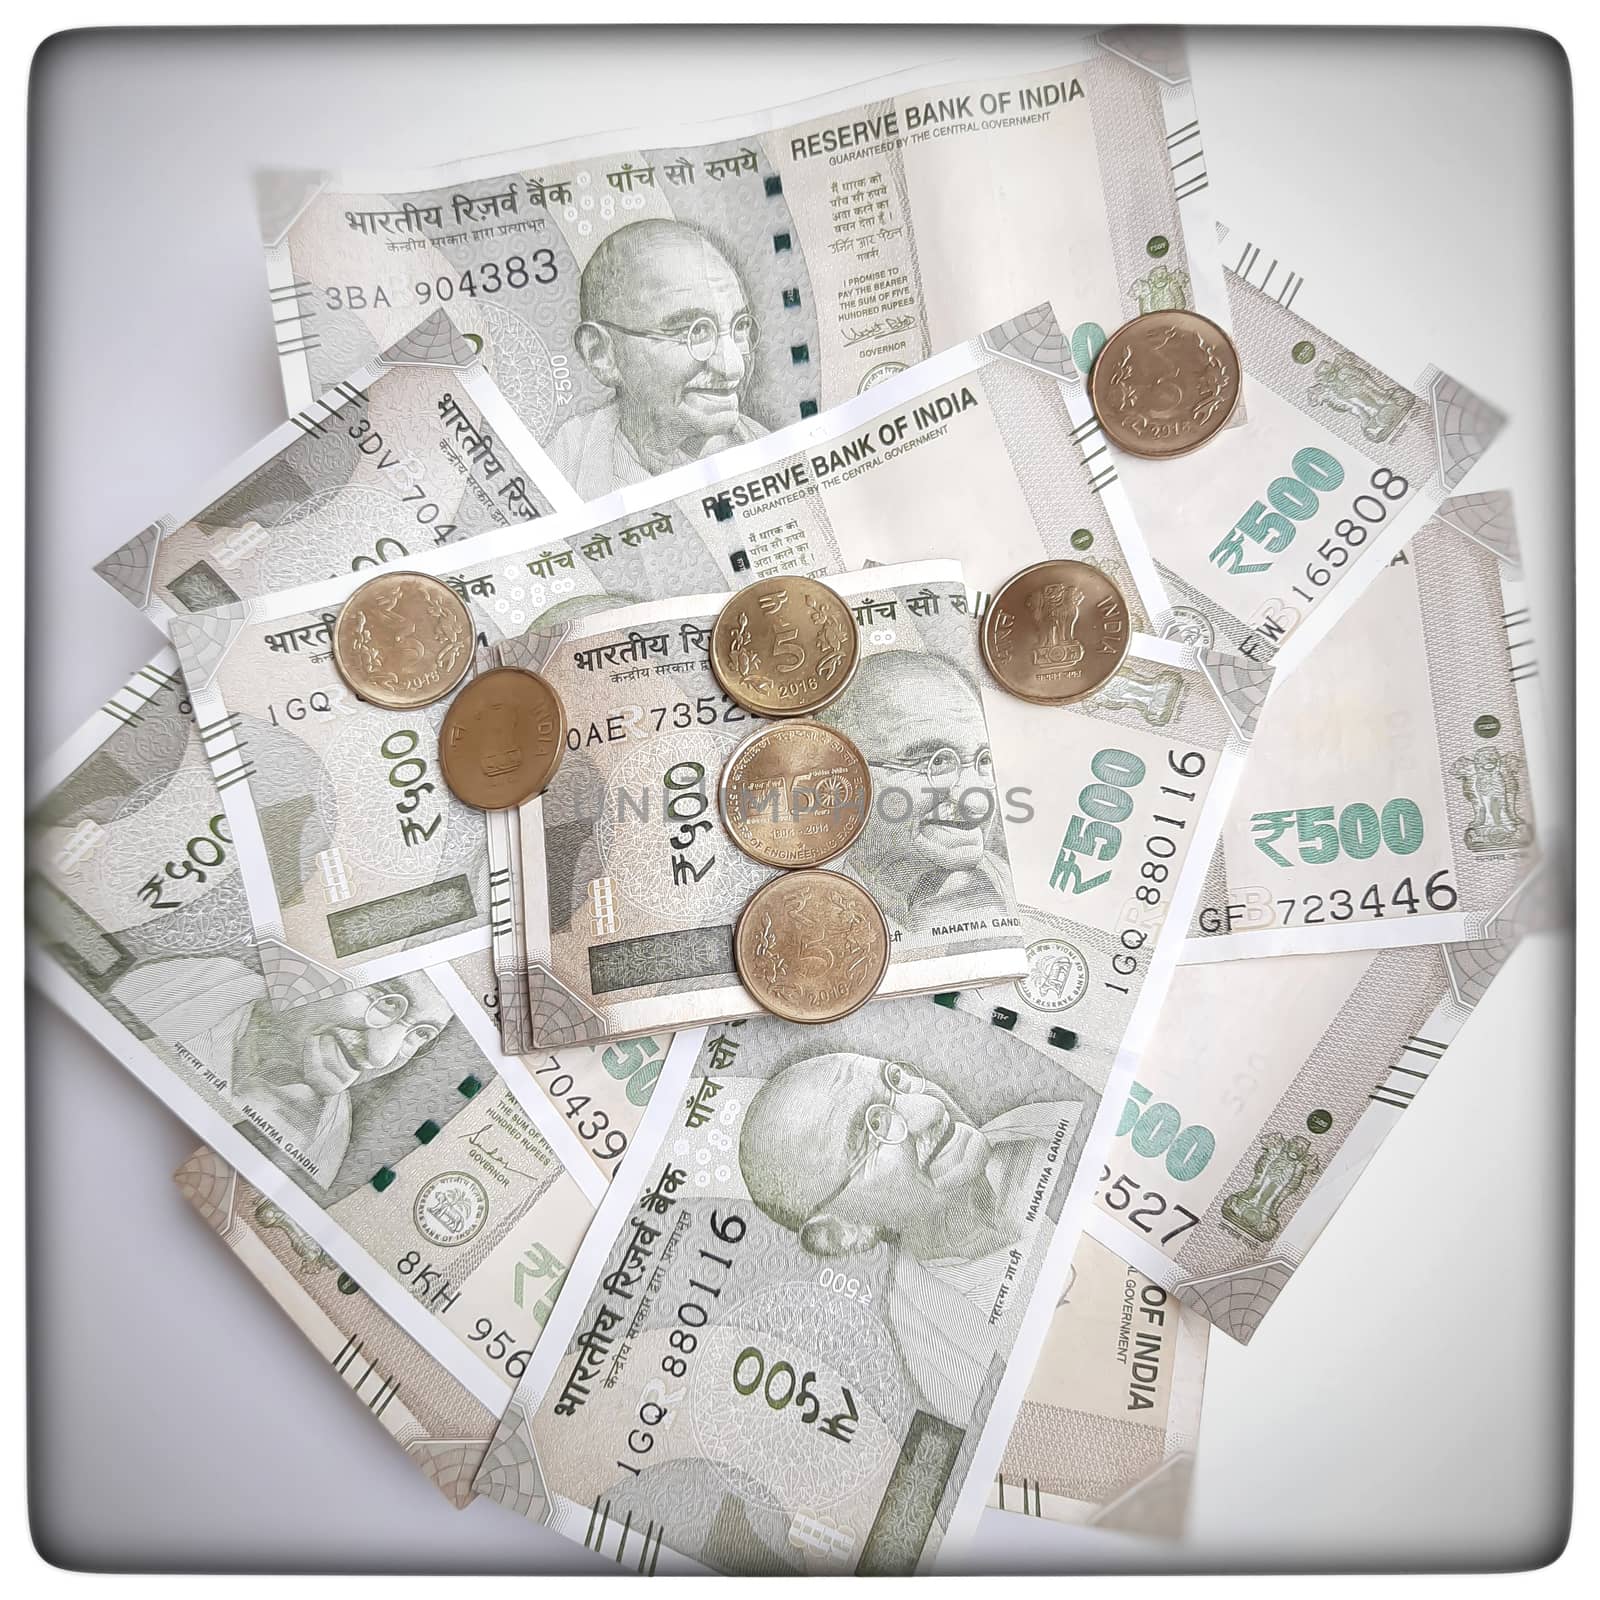 Indian new 500 rupees currency notes spread randomly with 5 rupee coins in white paper by AnithaVikram